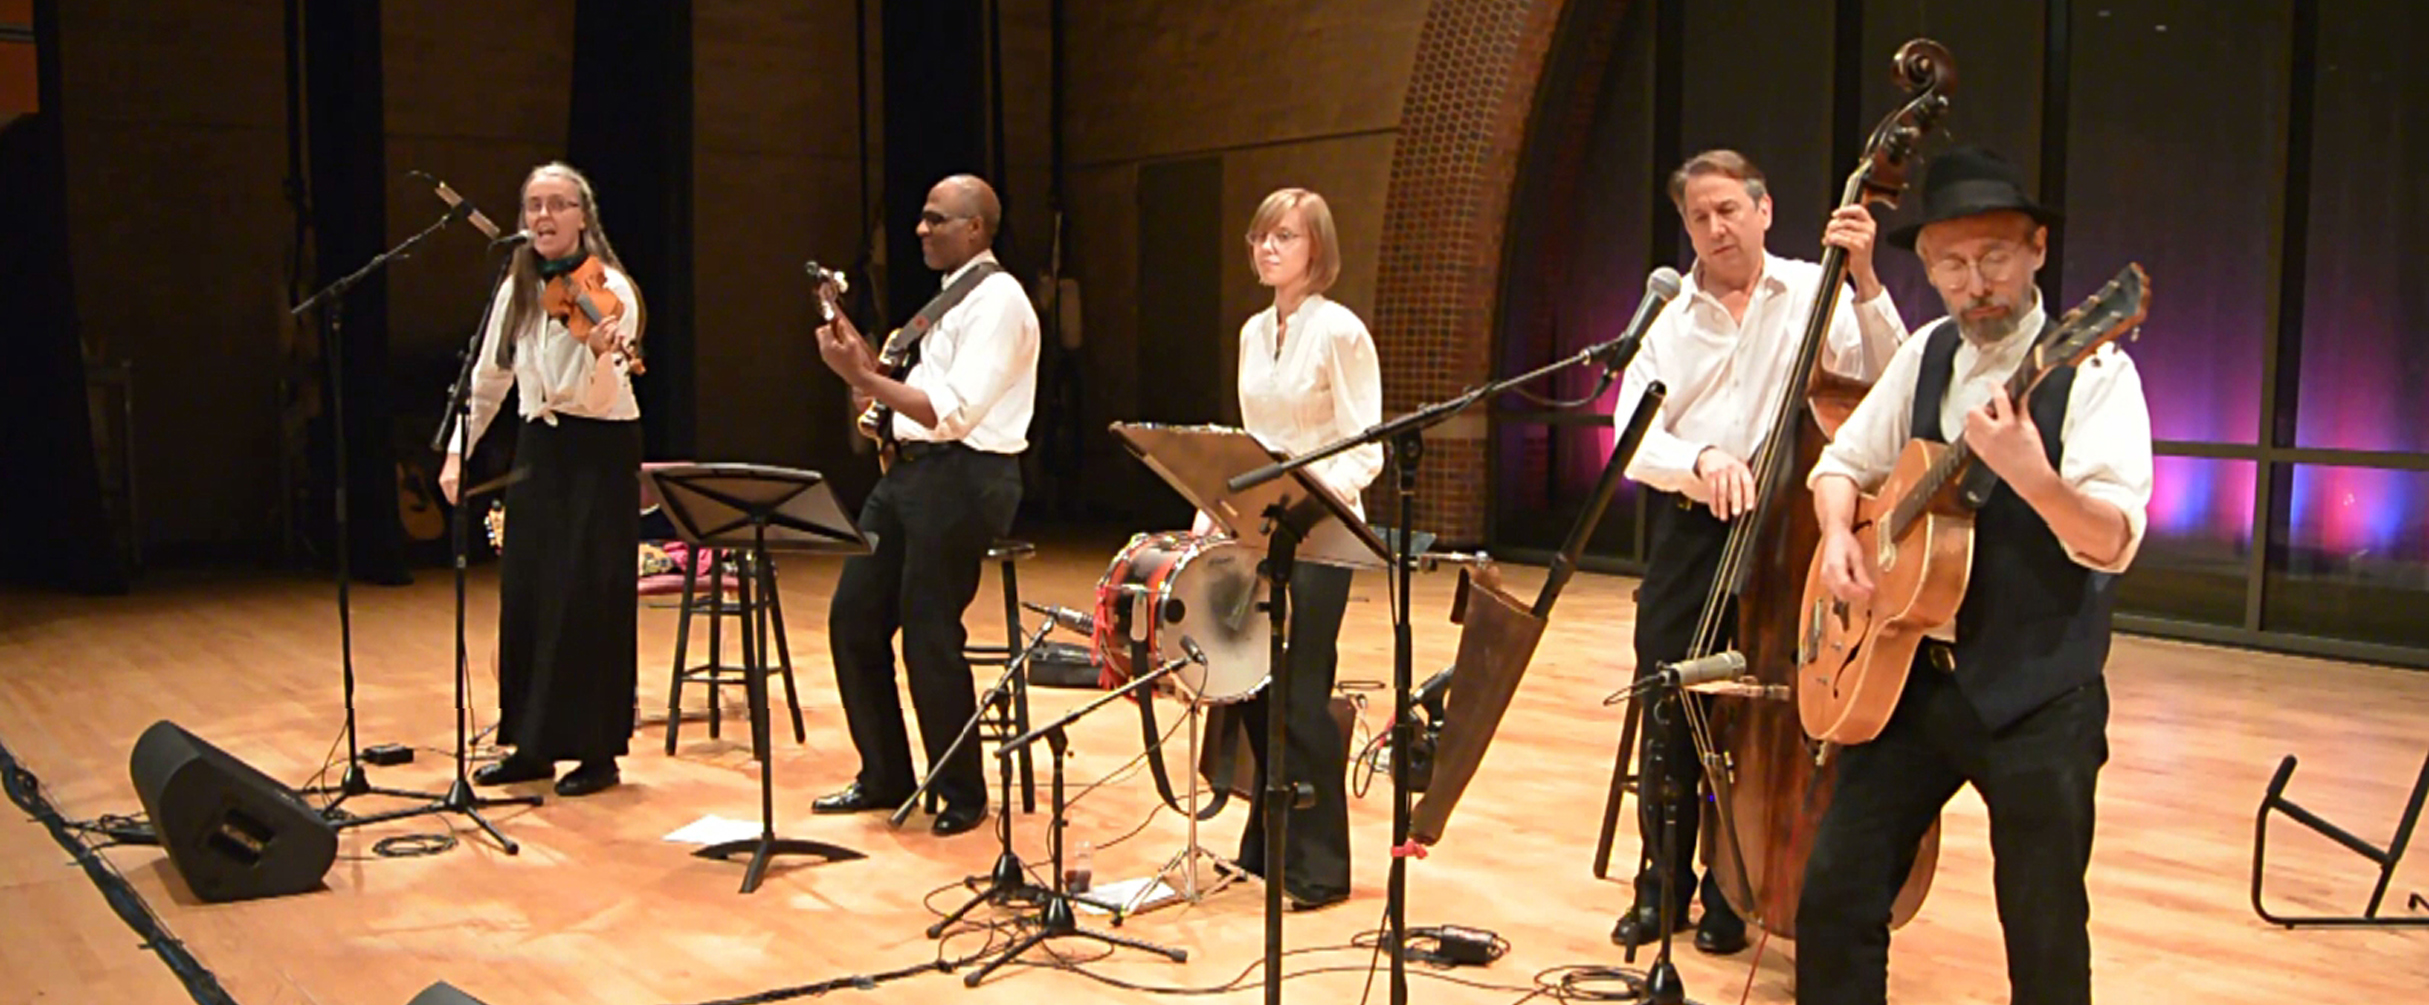 Jutta & the Hi-Dukes (tm) performing as a quintet on stage at the University of Missouri, St. Louis.